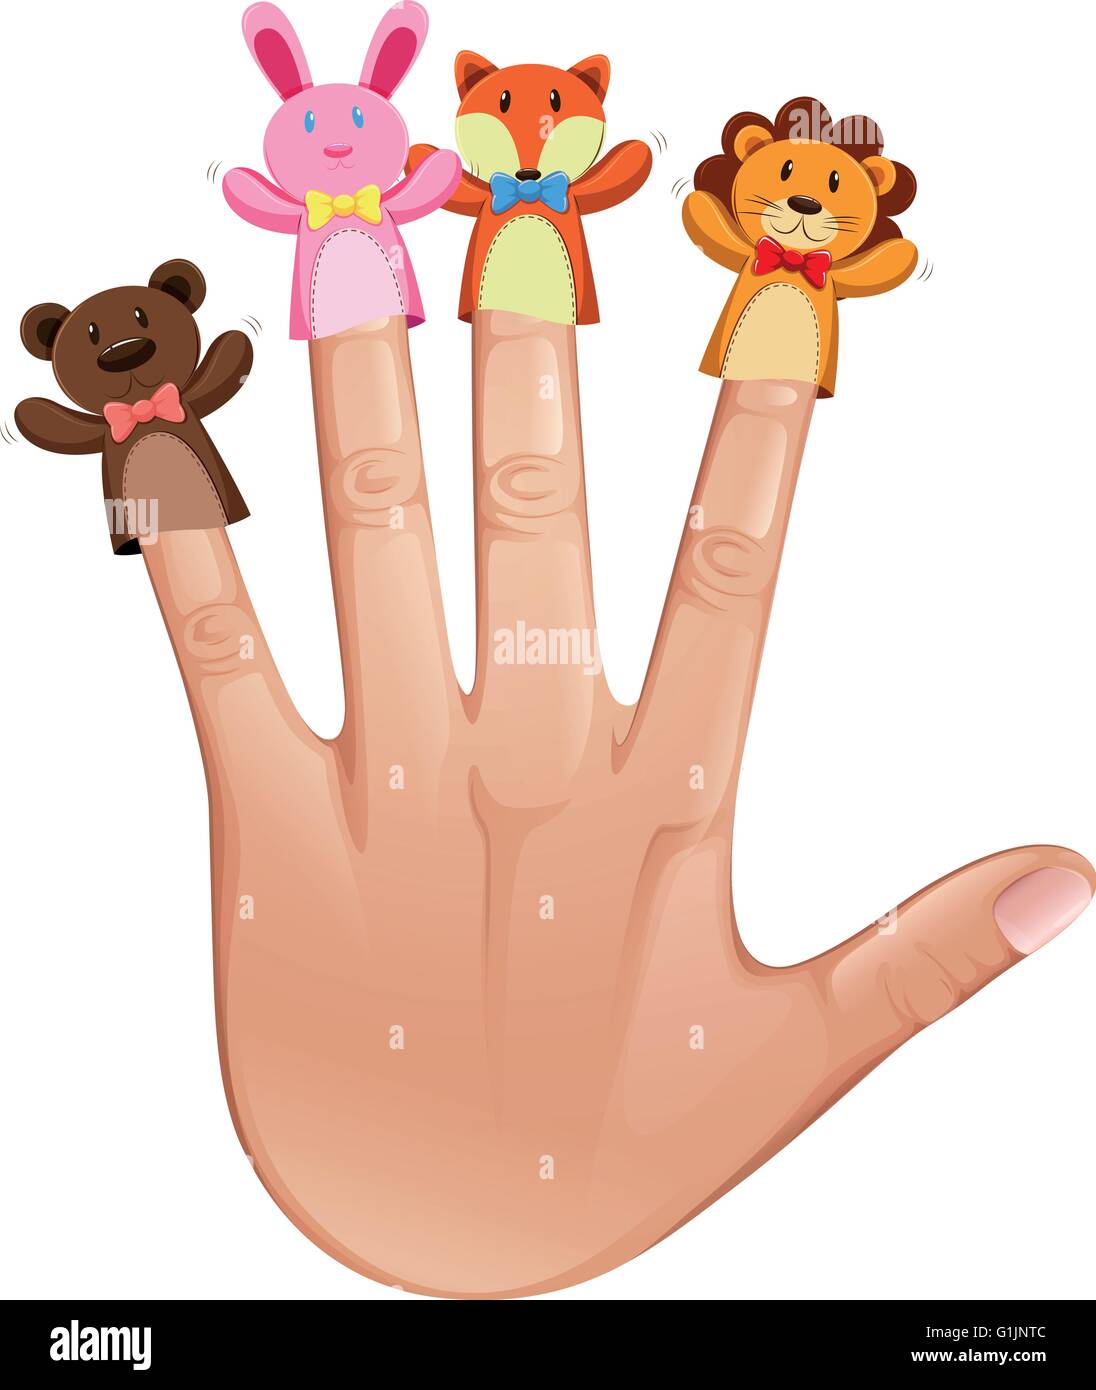 Four finger puppets on human hand illustration Stock Vector